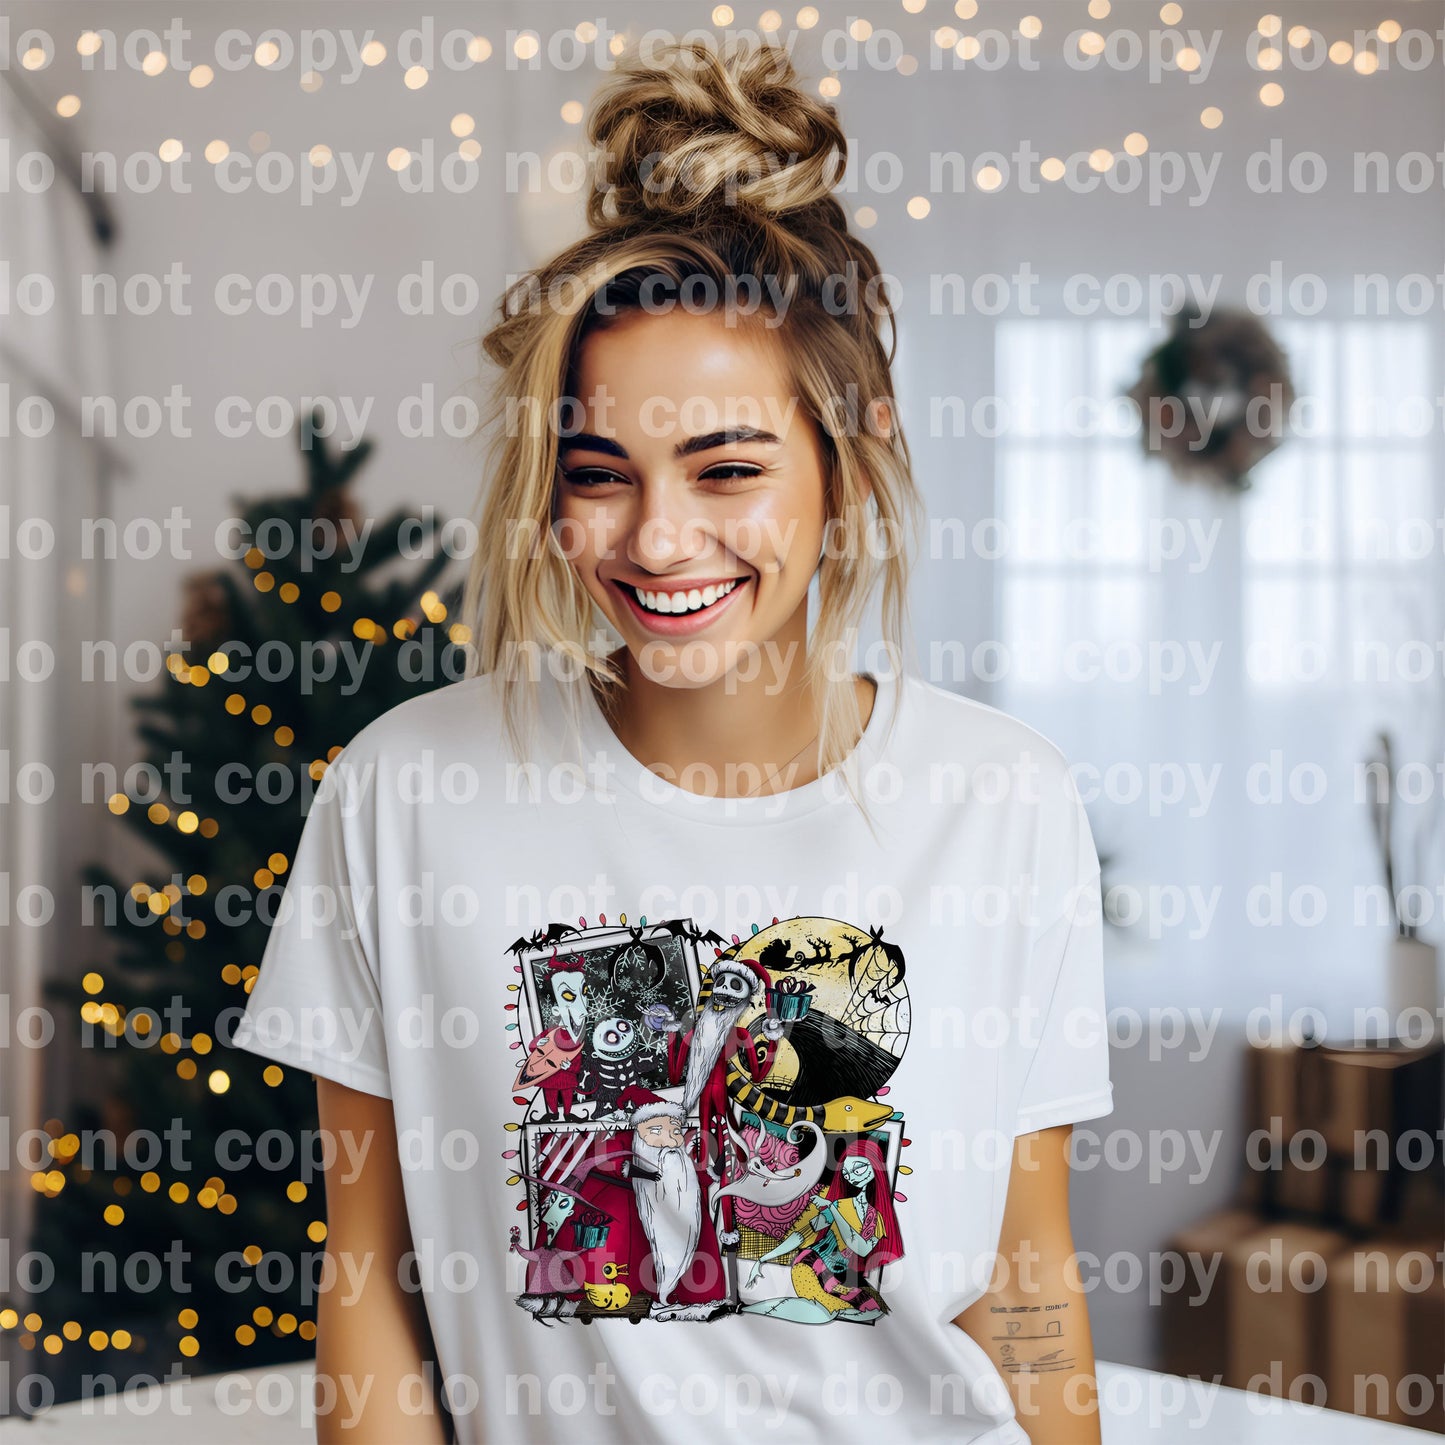 NBC Characters Christmas with Optional Two Rows Sleeve Designs Dream Print or Sublimation Print